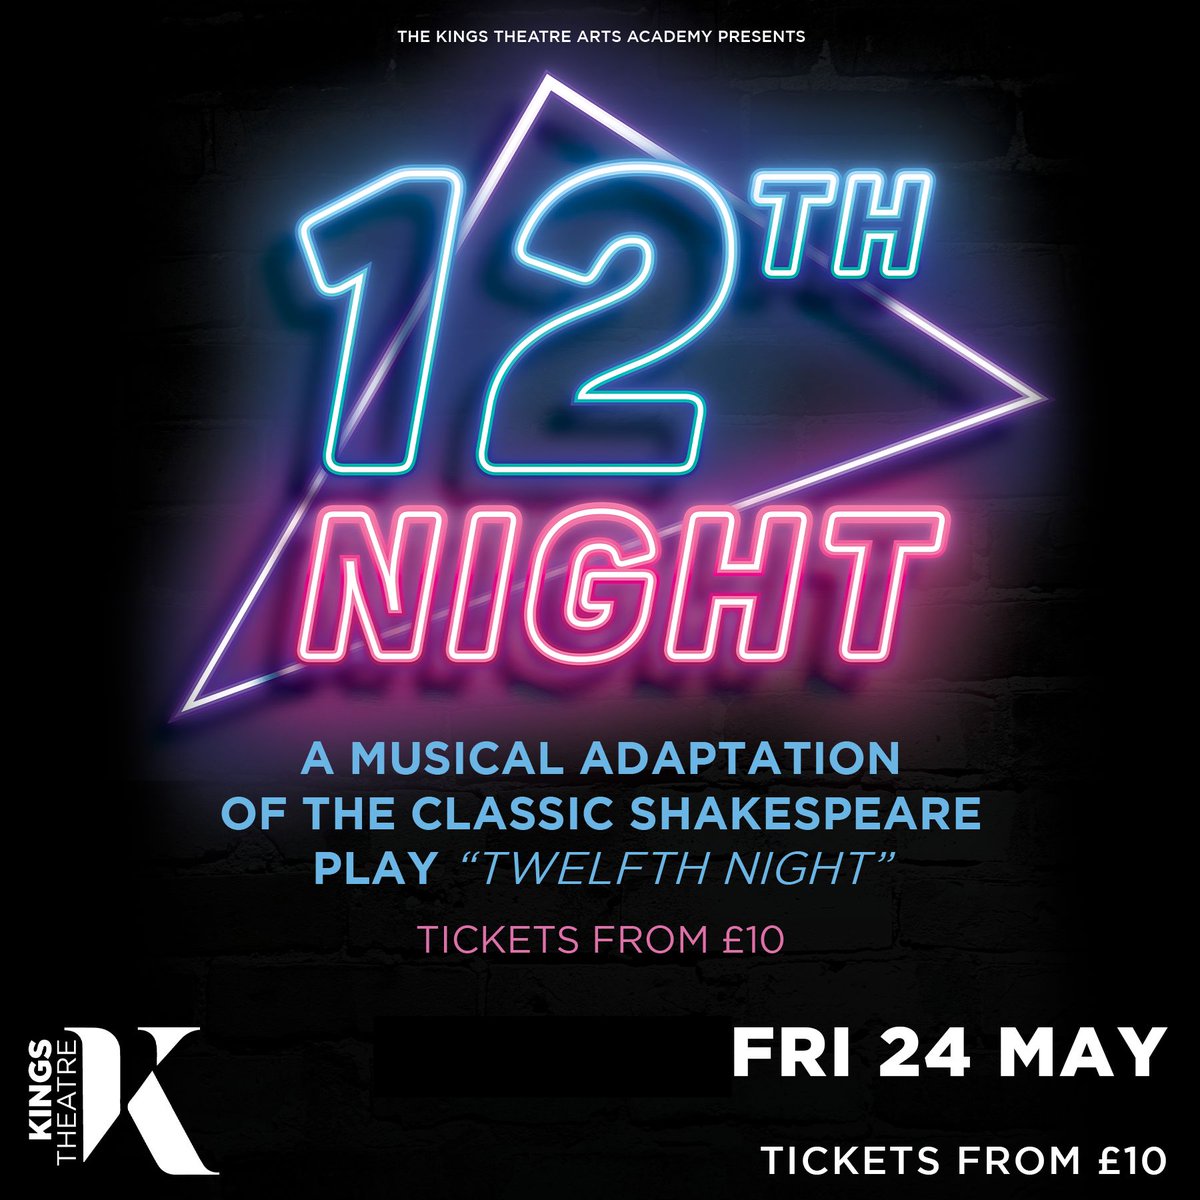 The Kings Theatre Arts Academy are excited to bring their own adaptation of Twelfth Night by Shakespeare! This musical re-envision of the classic play features 90s songs songs such as Creep, Wonderwall, I'm Gonna Be and more! 📅 Fri 24 May 🎟️ Tickets➡️ buff.ly/3Wy4HF2